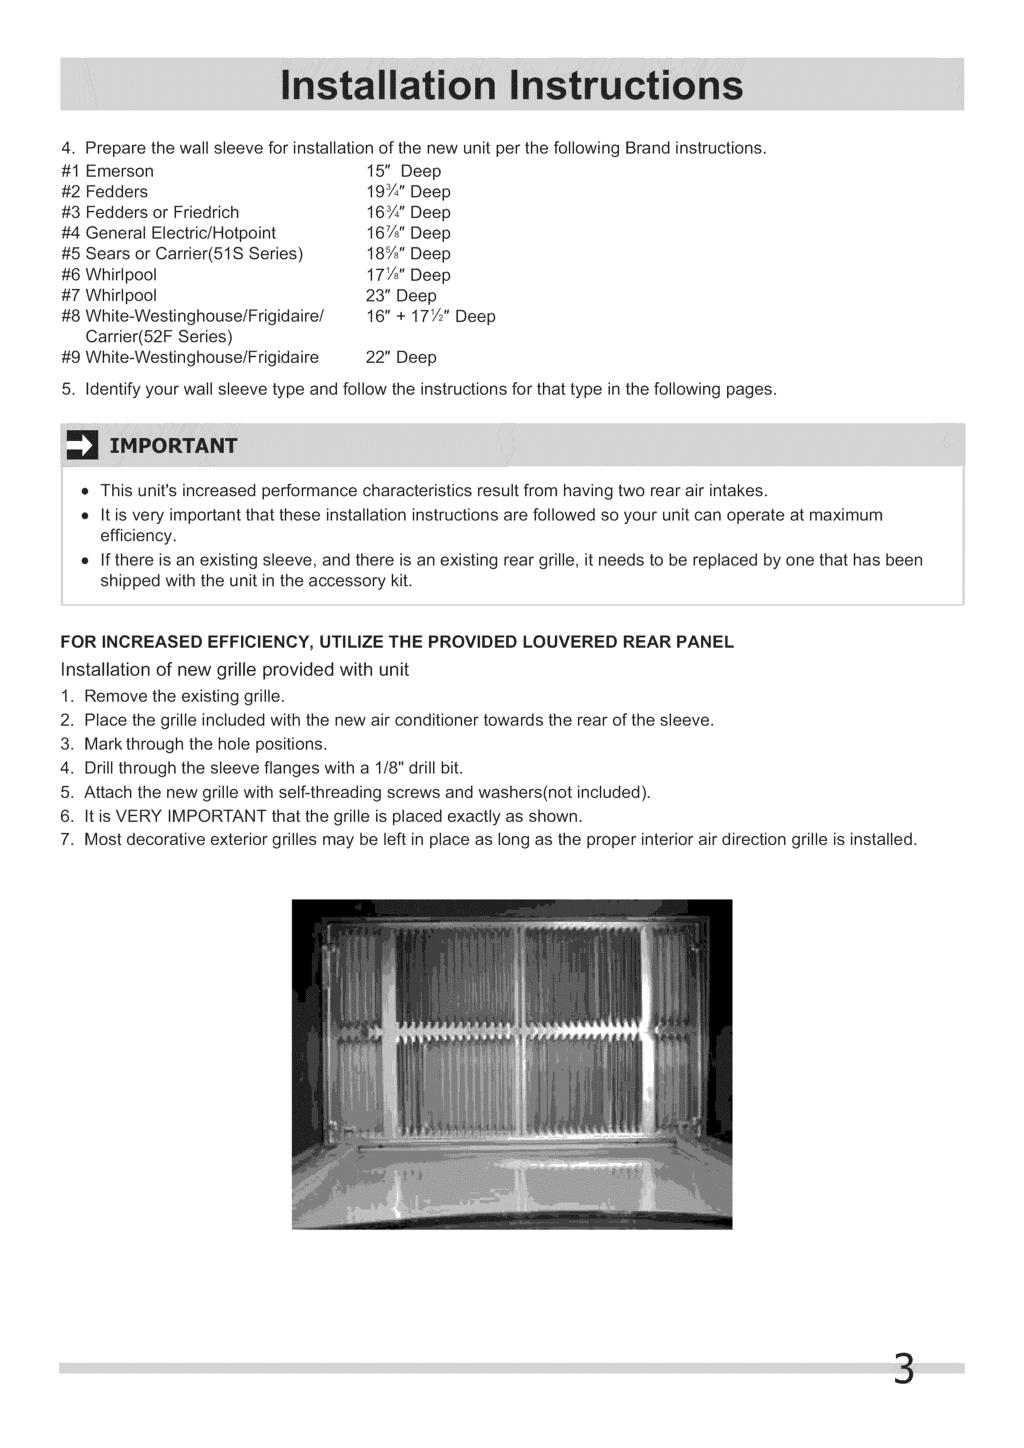 . Prepare the wall sleeve for installation of the new unit per the following Brand instructions.